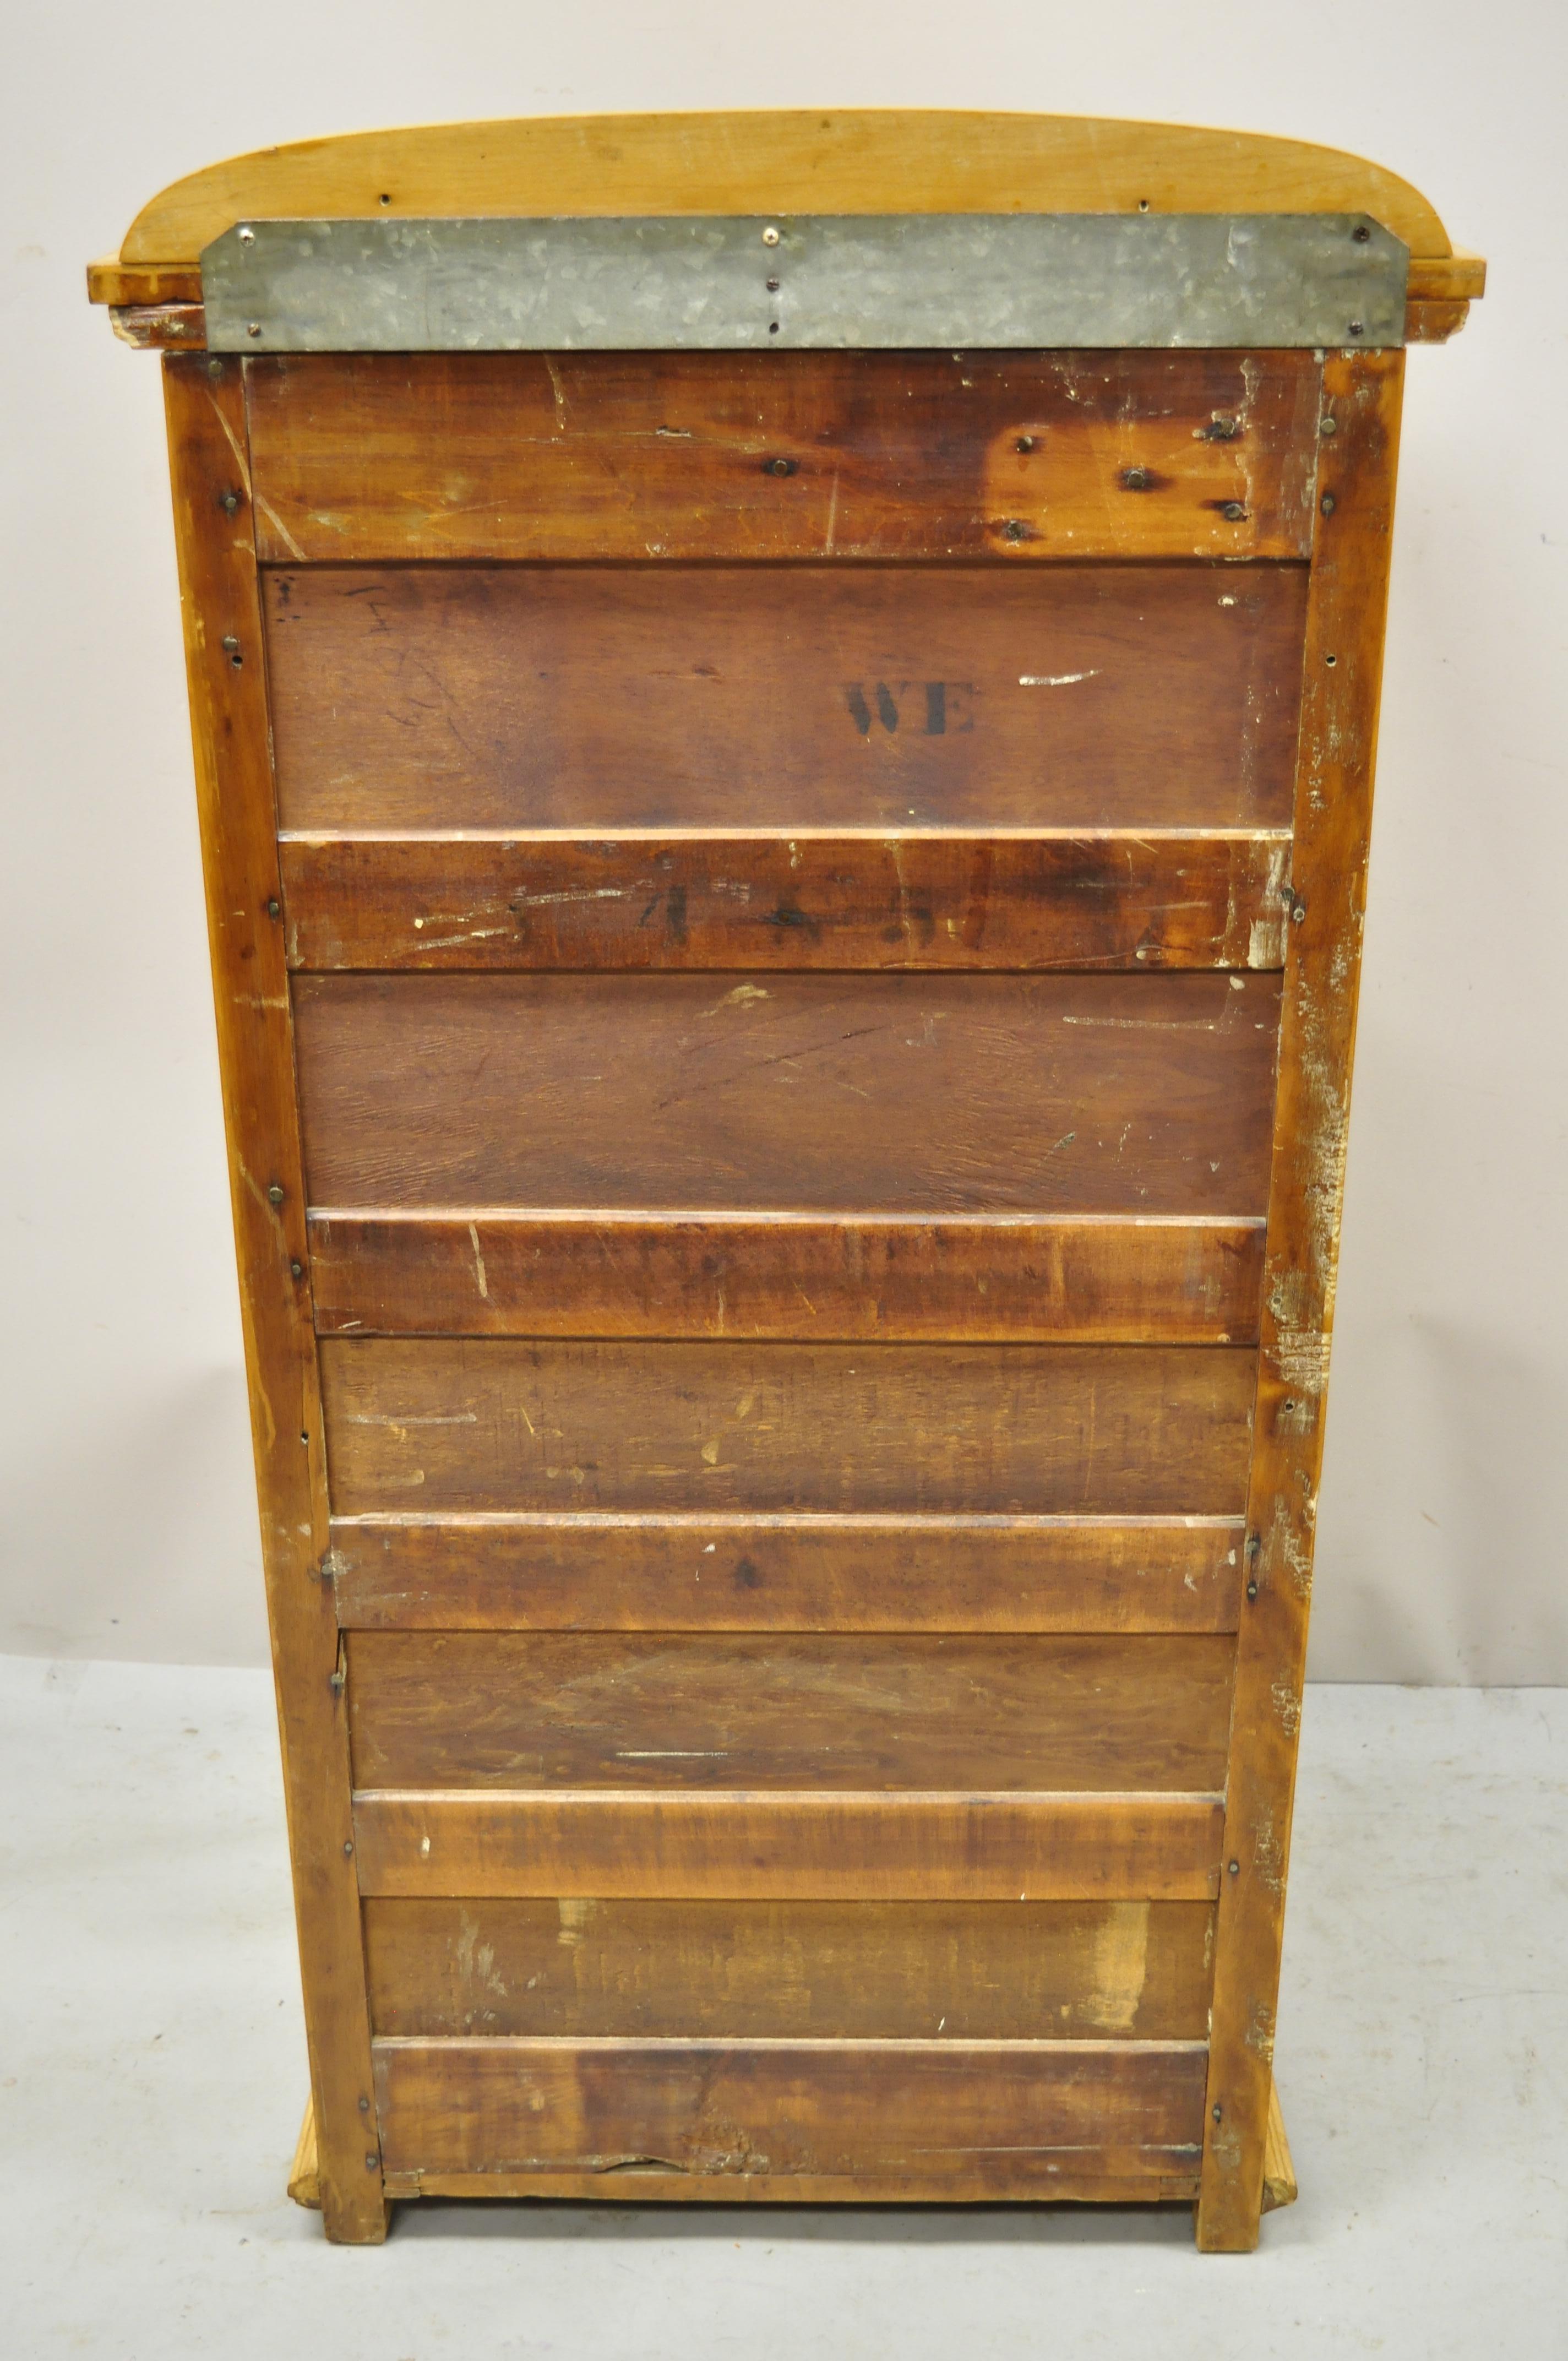 Leather Antique Maple Wood American Empire Tall Chest Washstand Dresser Cabinet For Sale